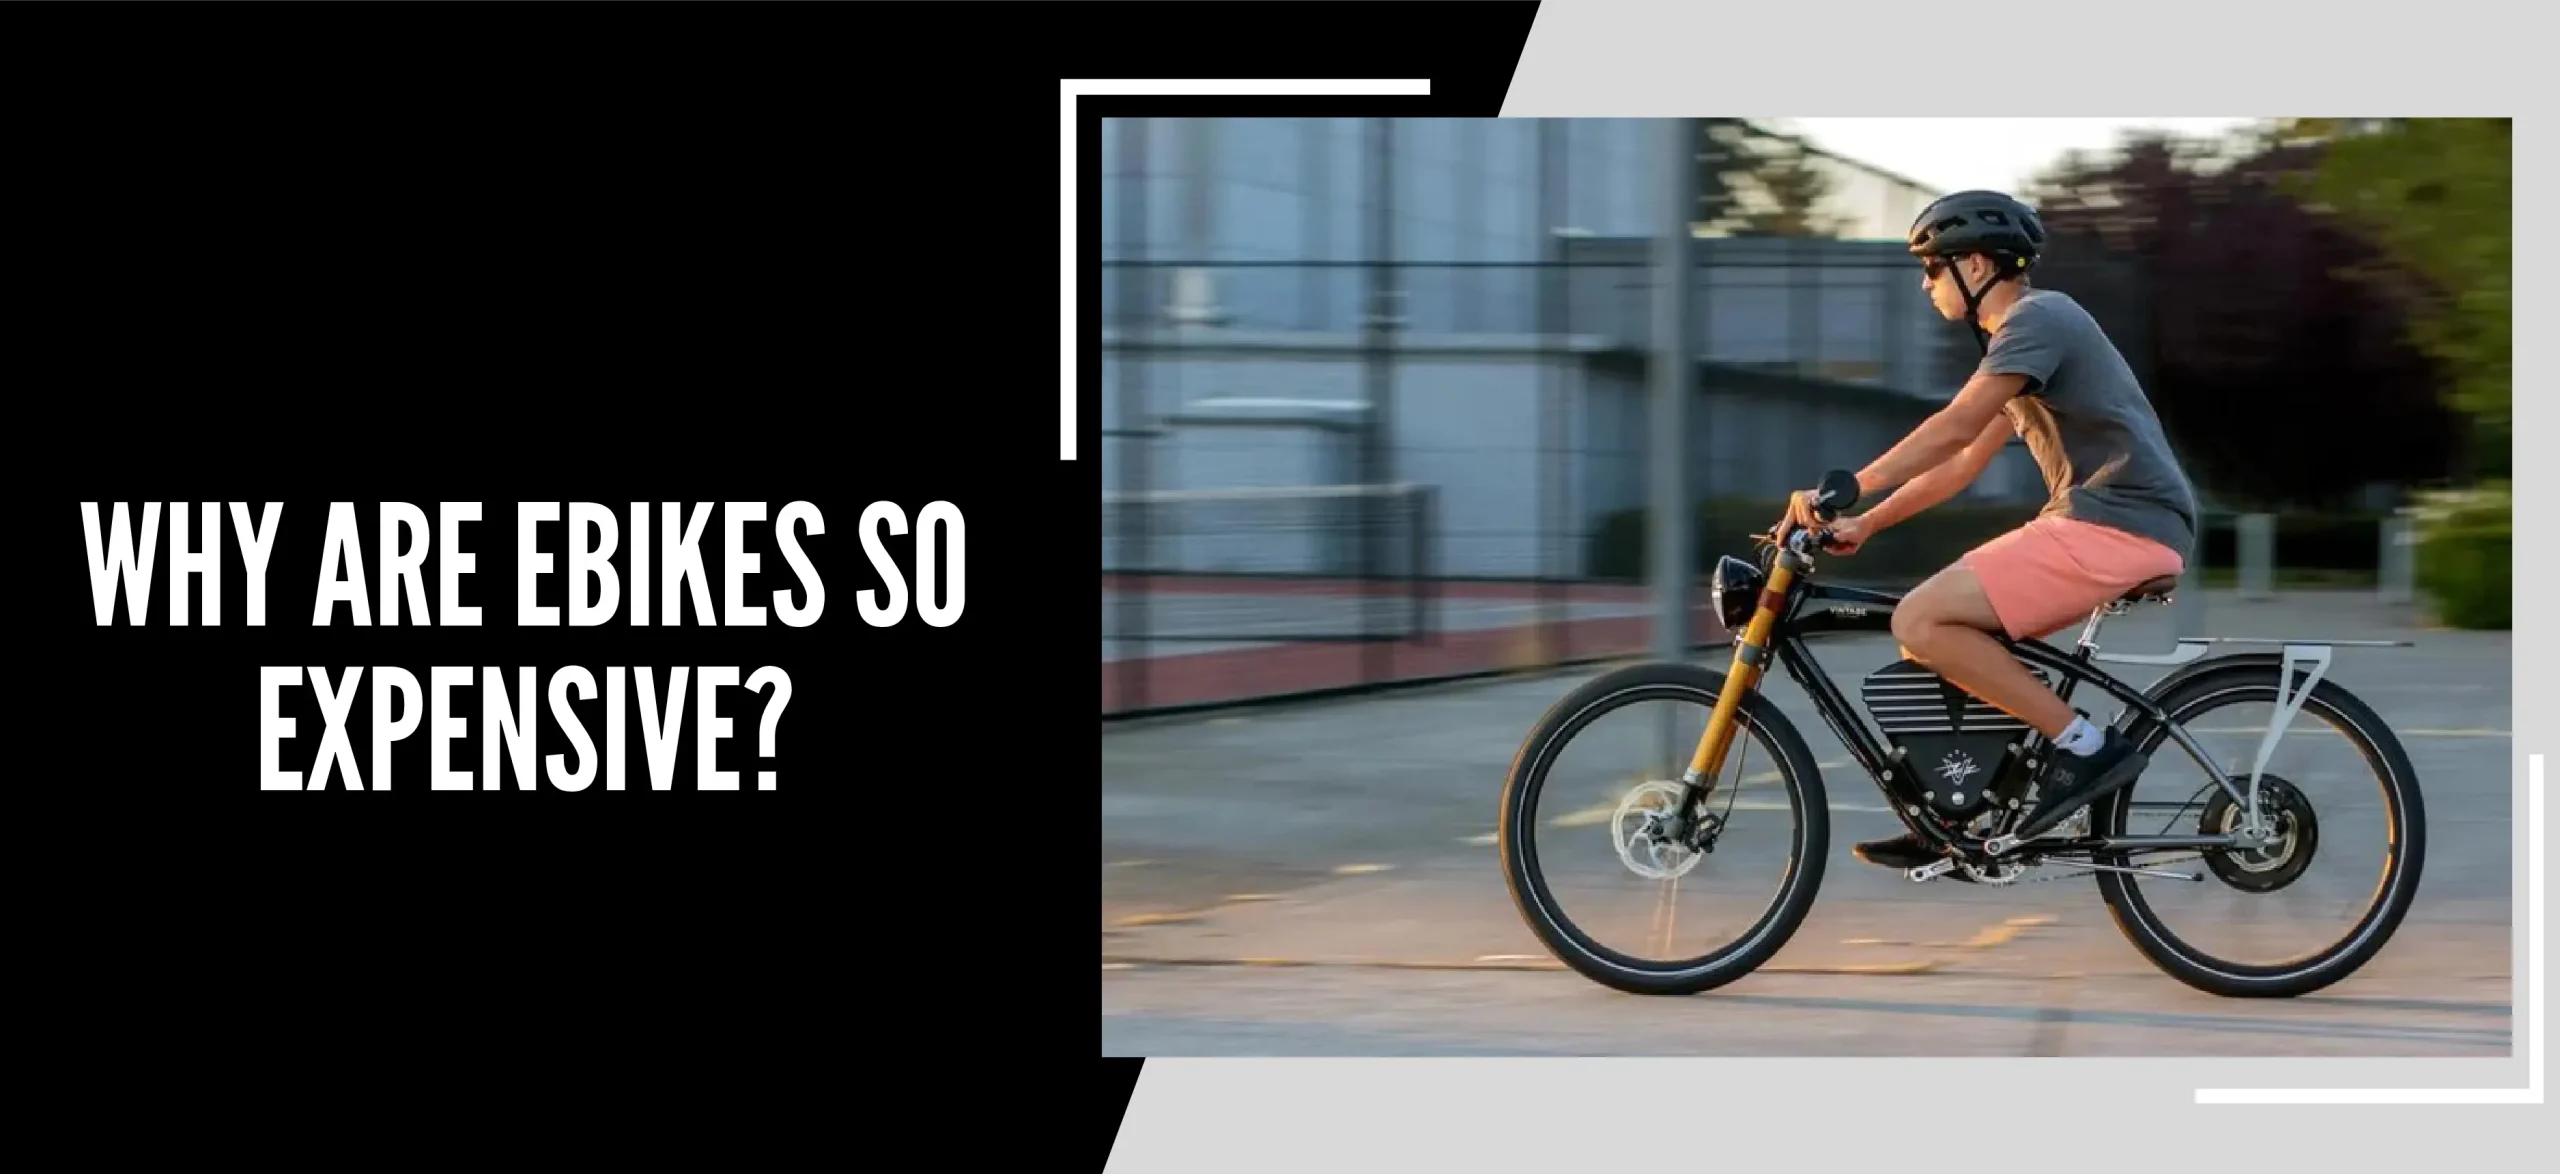 Why Are EBikes So Expensive?